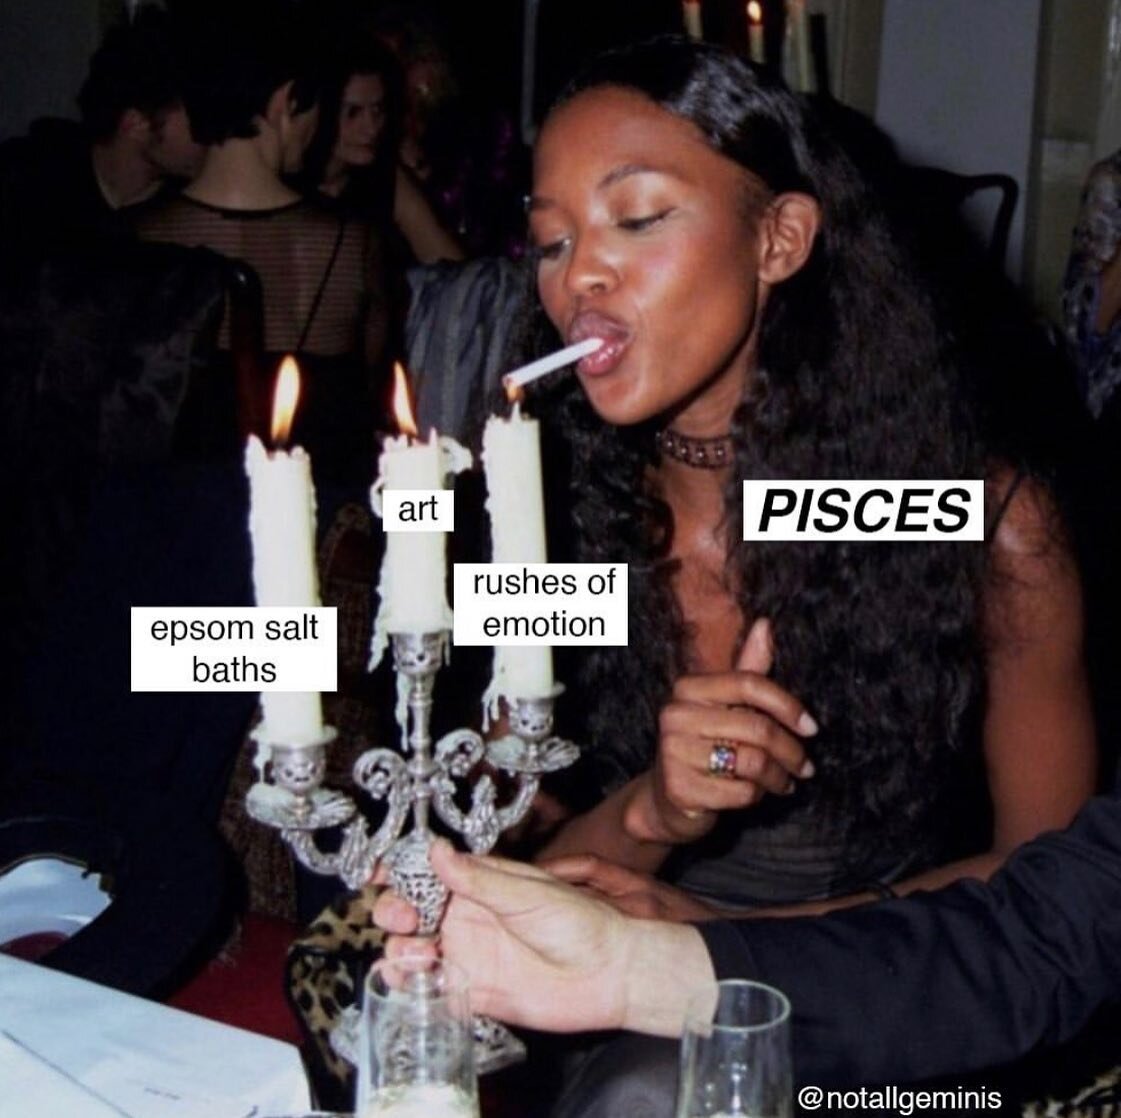 ARE U FEELING PSYCHIC? ✨ Pisces season is here, and our music team (including our resident Pisces princess EIC @alienemz ) have curated a Pisces Power Hour playlist on the Wednesday Zine Spotify that will both get you in your deep feels and remind yo